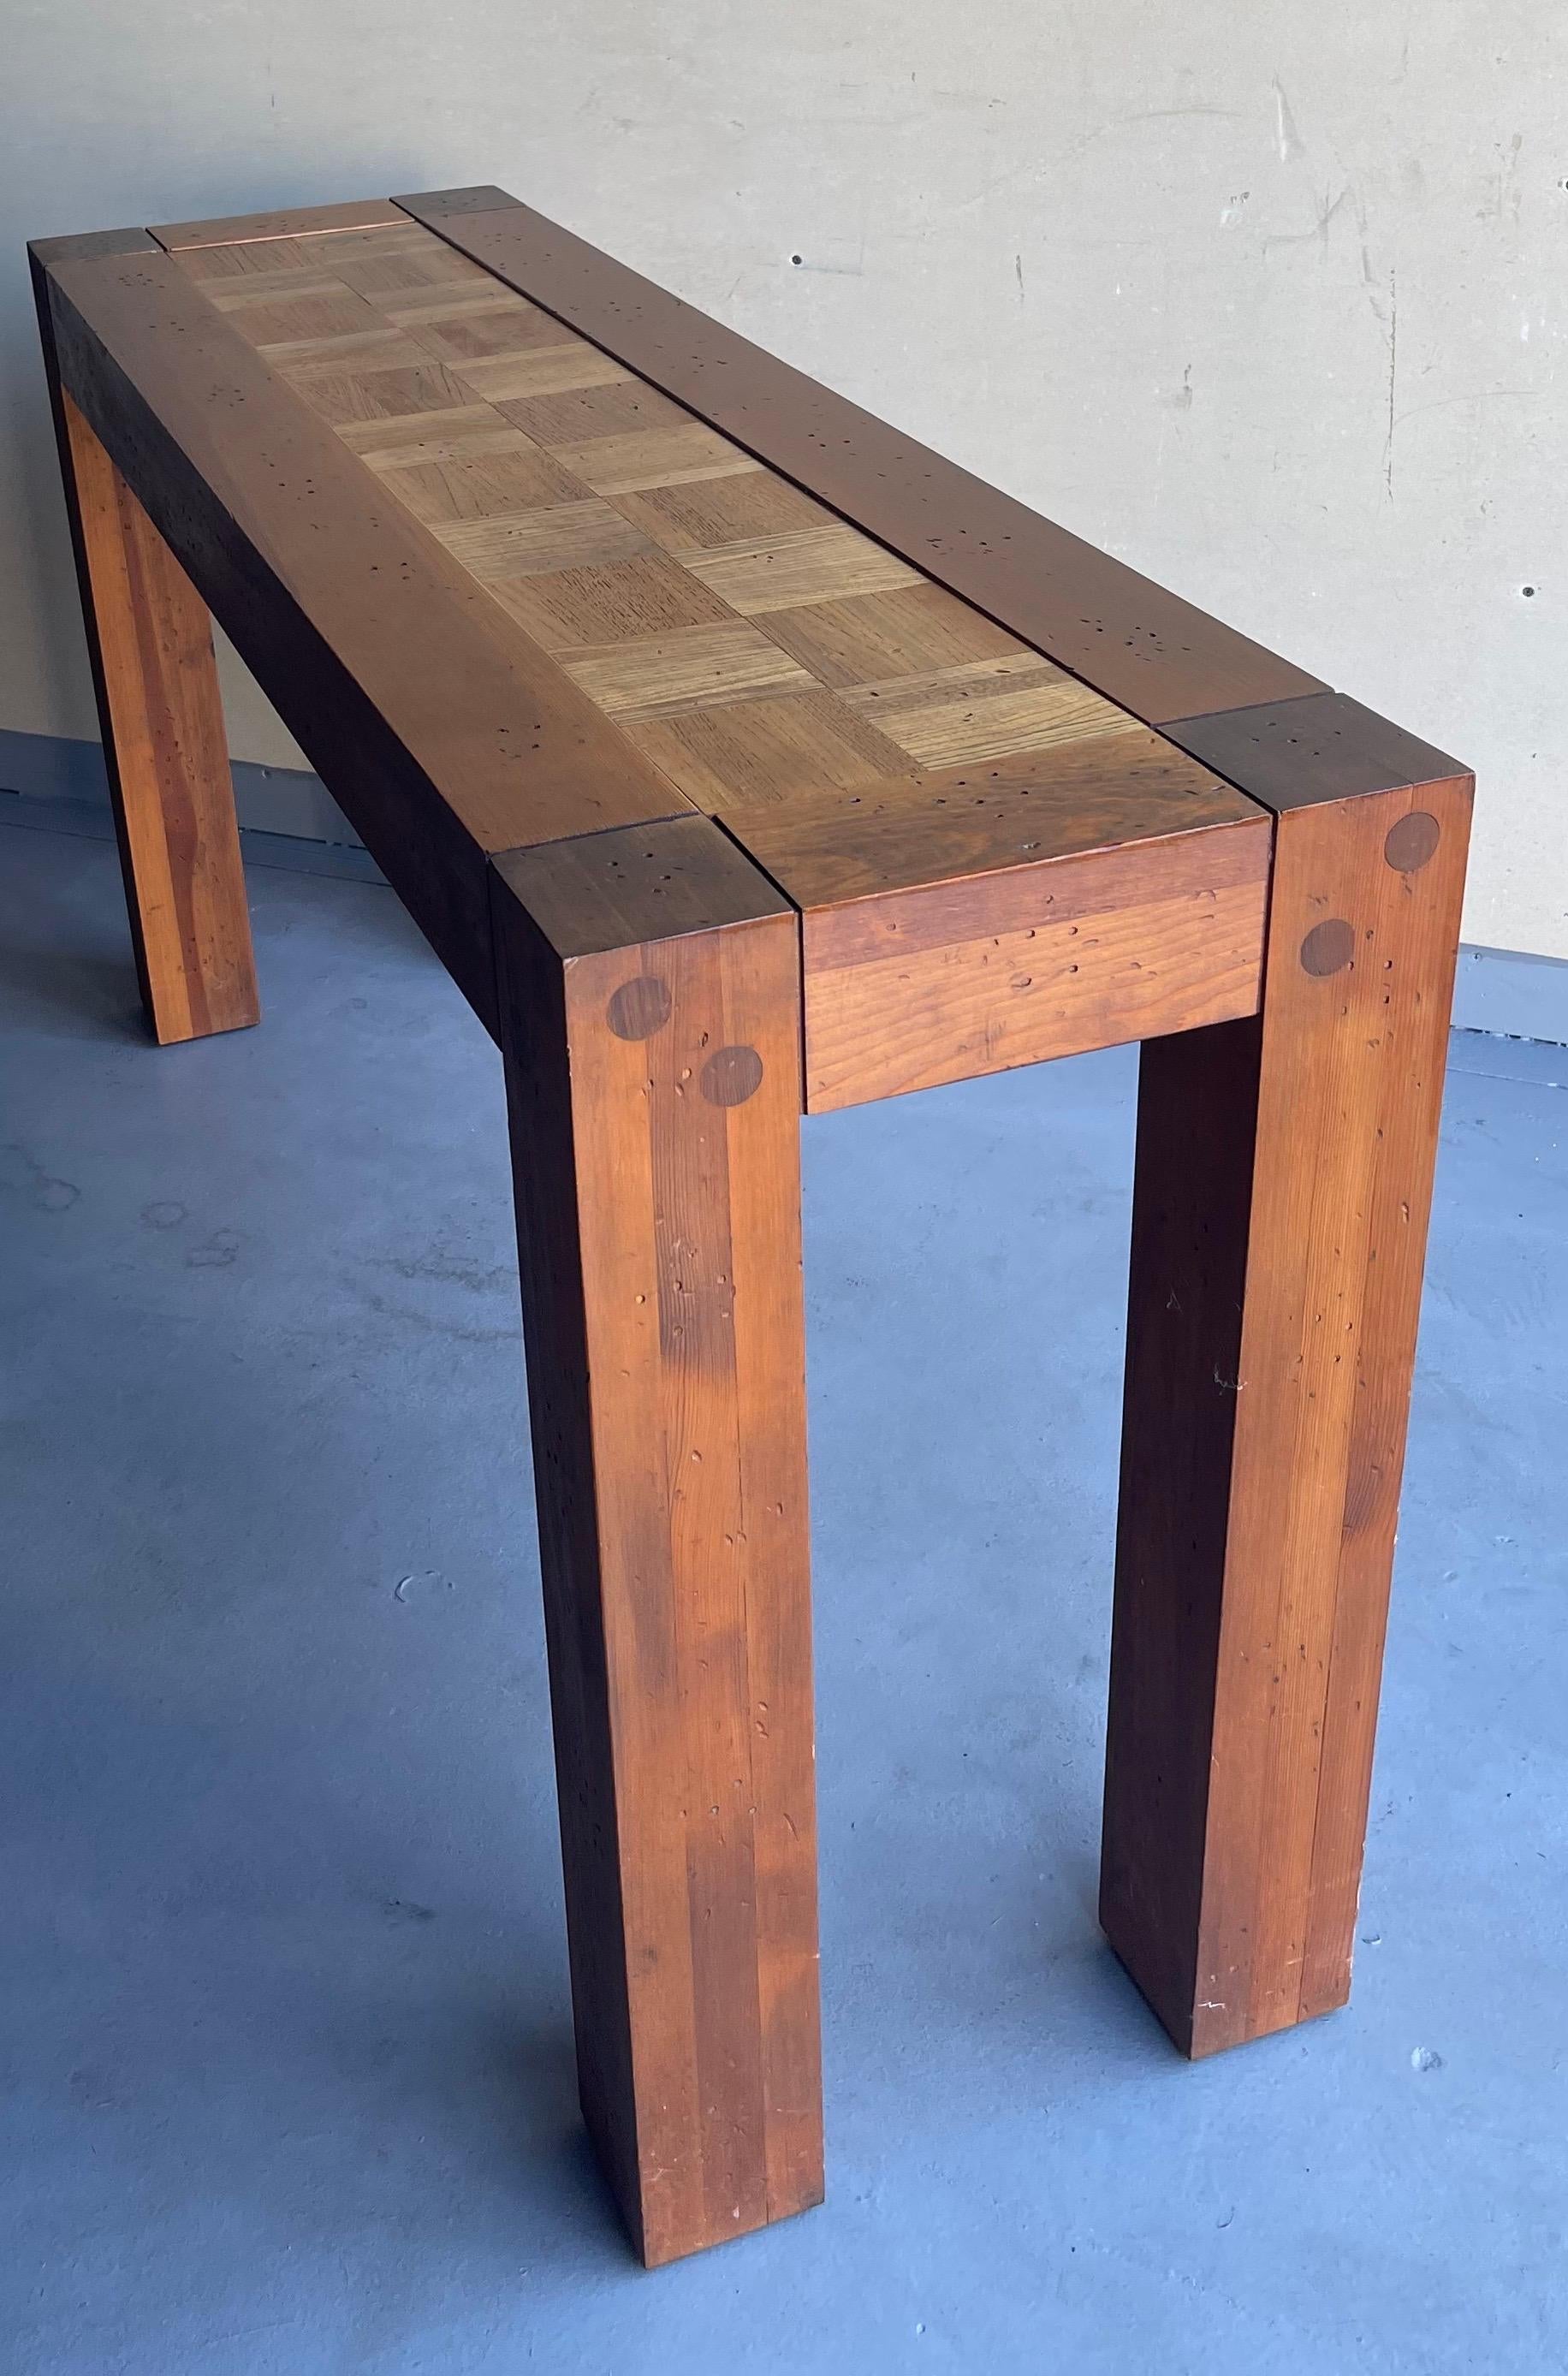 A very cool Lou Hodges style California design walnut and parquet oak console table, circa the 1970s. A beautiful combination of solid oak and walnut frame with a great parquet design. The table is assembled with wood pegs (no nails) and has been